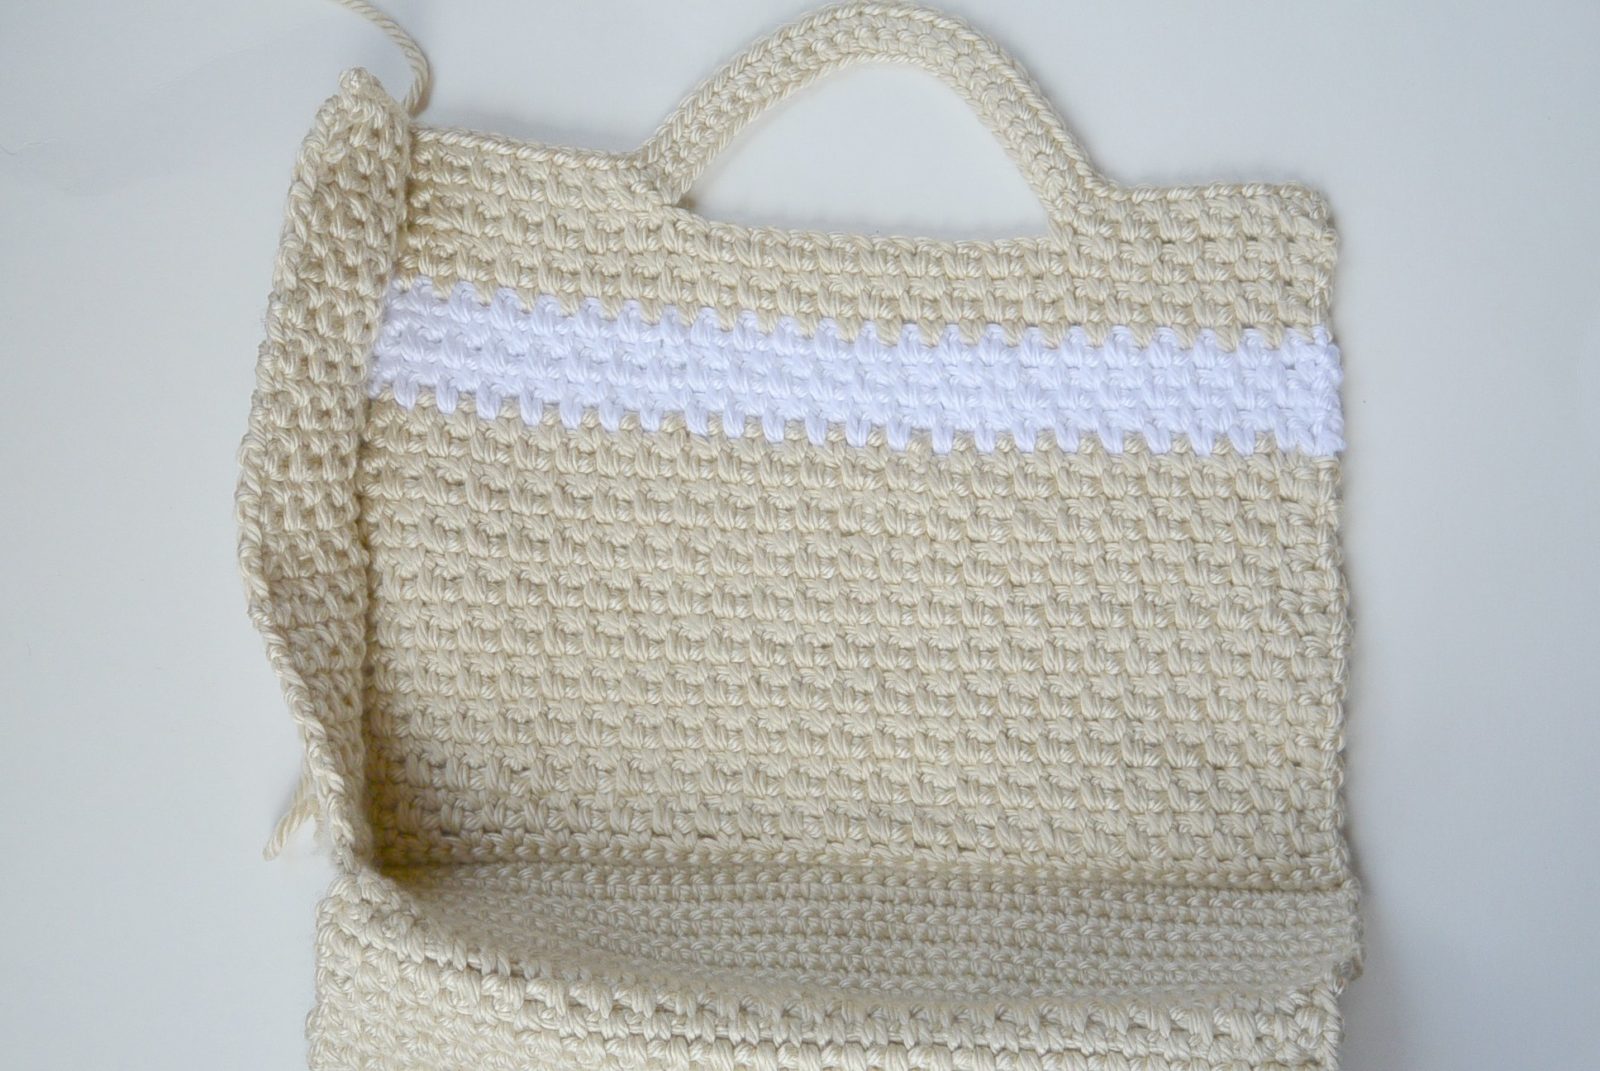 How to Make a Simple Crochet Bag + Free Pattern & Tutorial